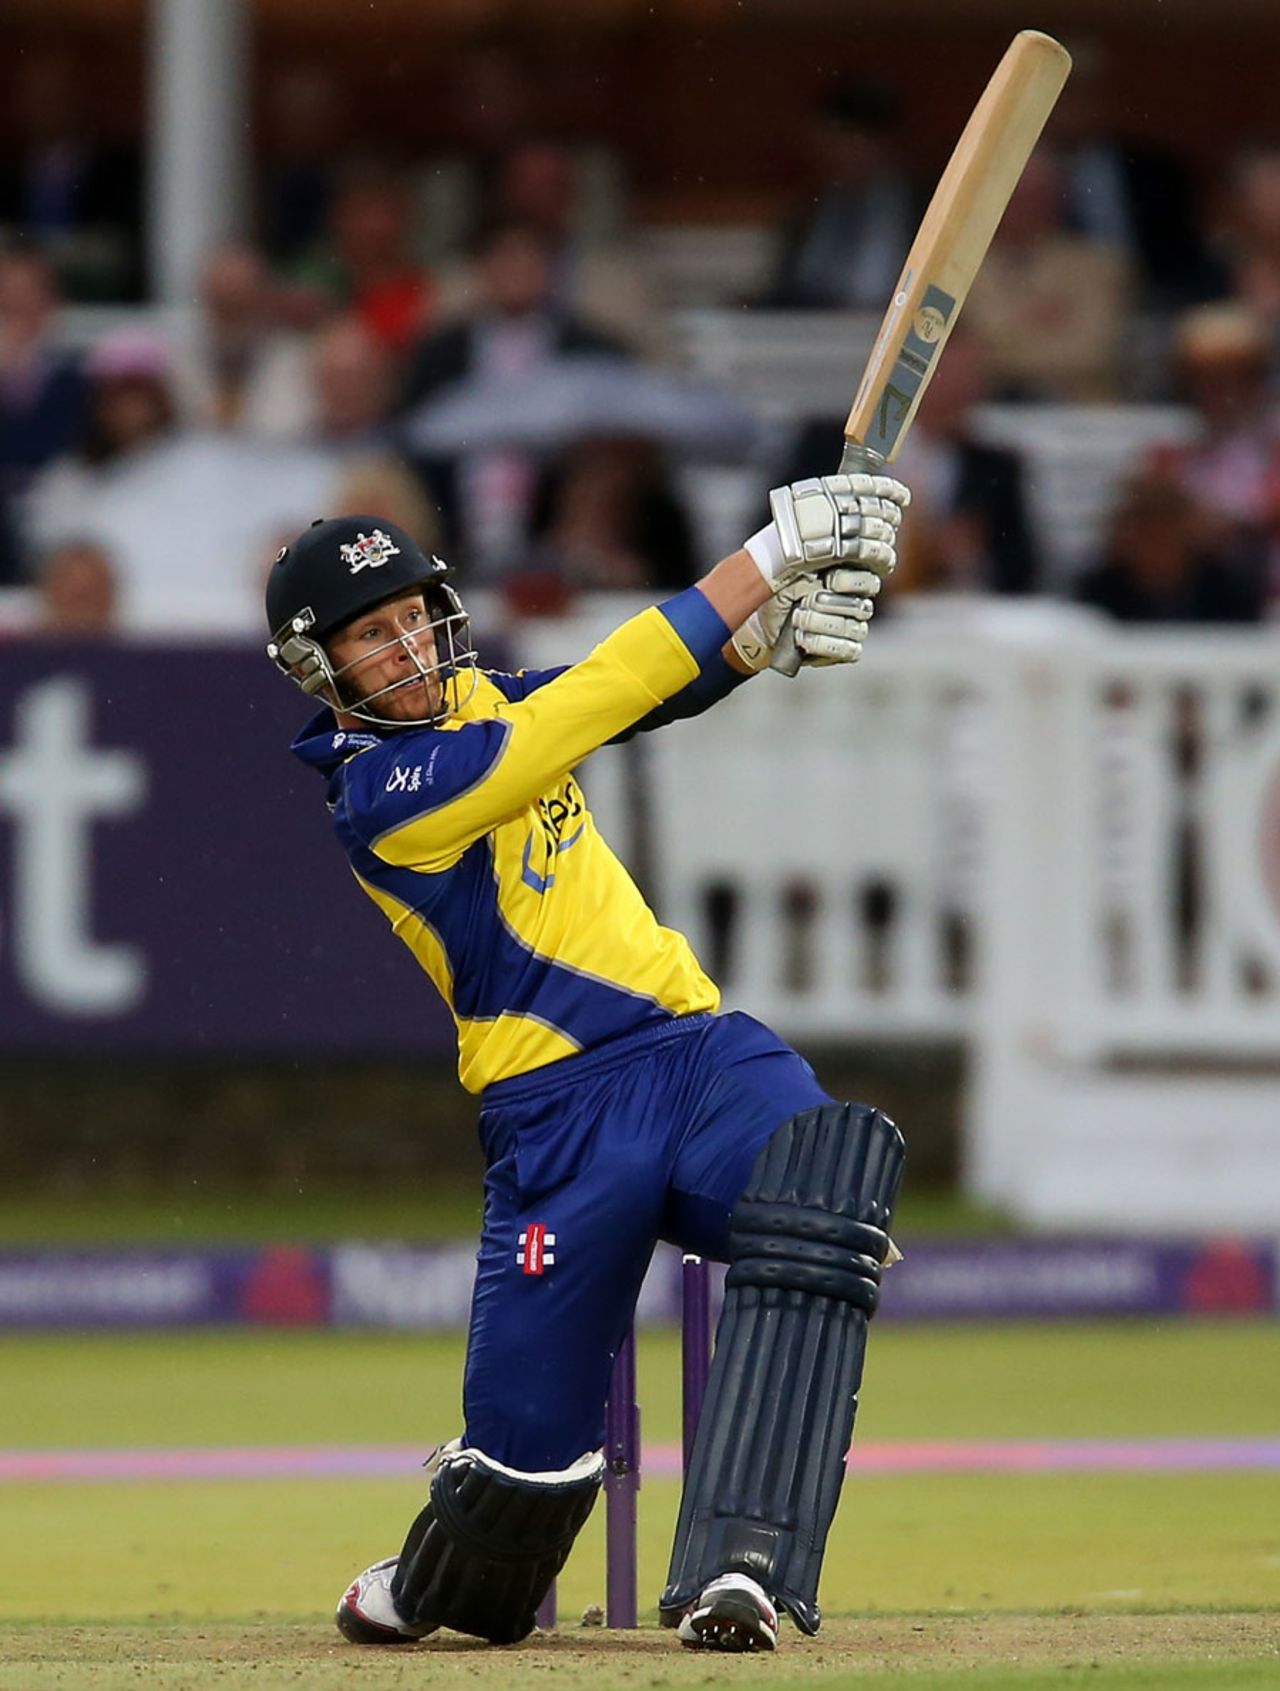 Adam Rouse was making his Gloucestershire debut, Middlesex v Gloucestershire, NatWest T20 Blast, Lord's, June 26, 2013